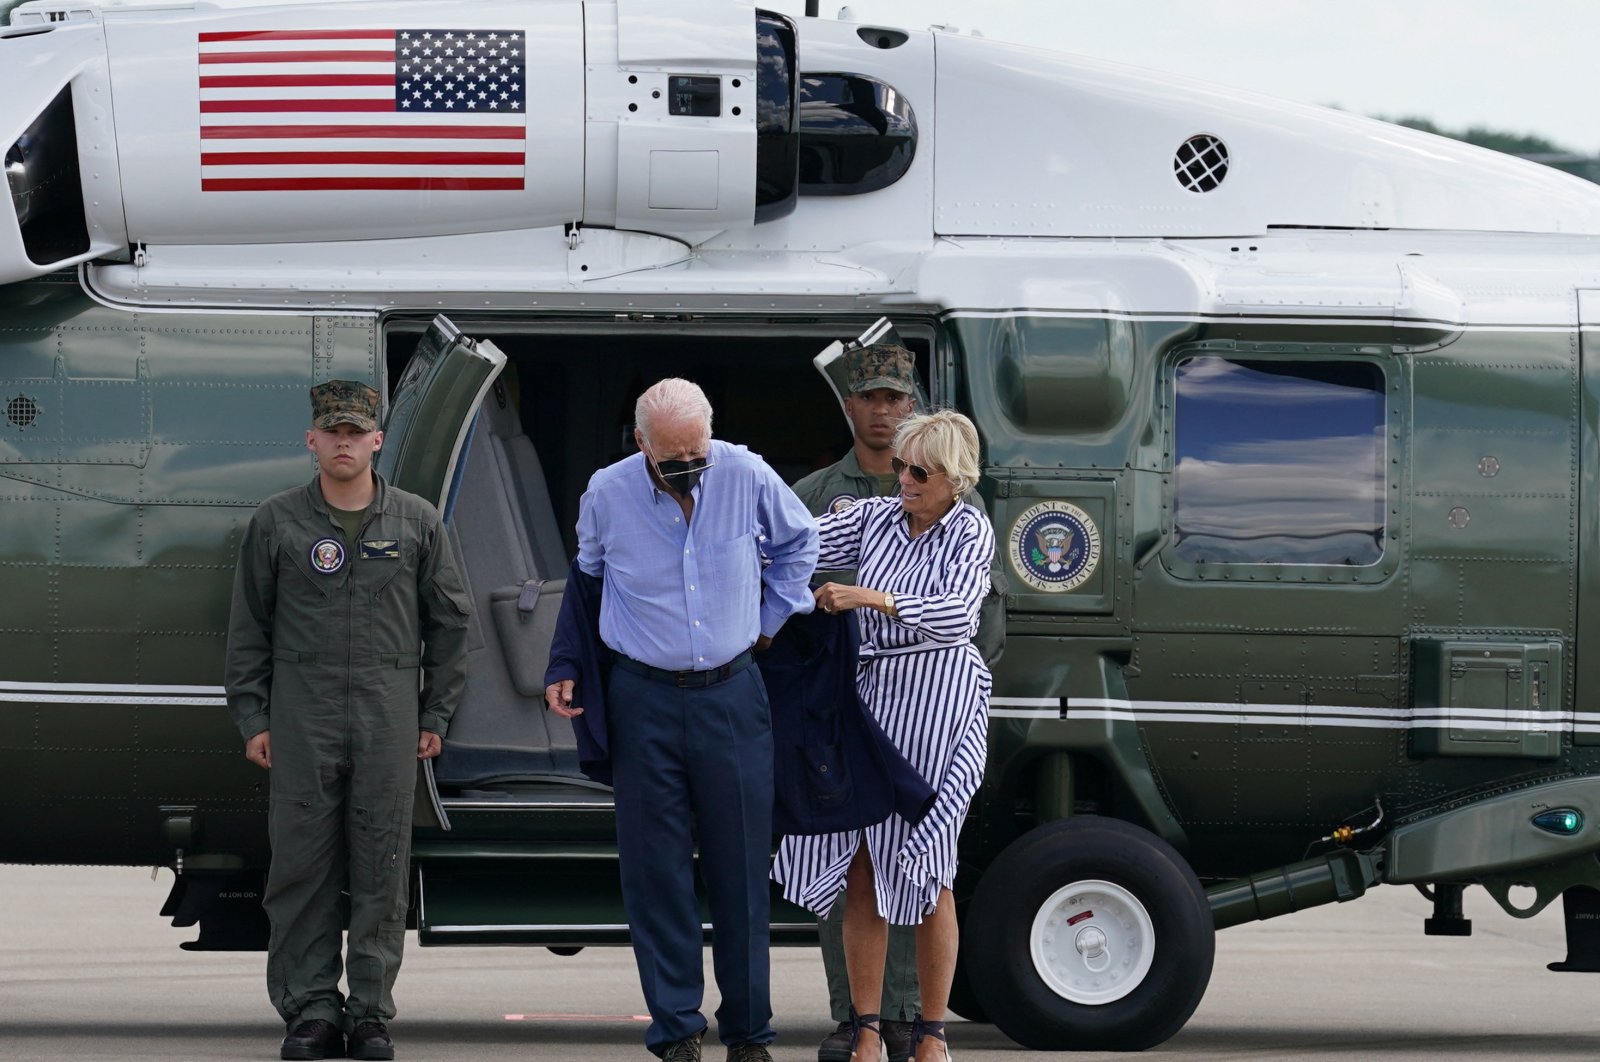 U.S. President Joe Biden gets a bit of help putting on his jacket from first lady Jill Biden as they step from Marine One to board Air Force One as they depart Lexington, Kentucky, U.S., Aug. 8, 2022. (Reuters Photo)